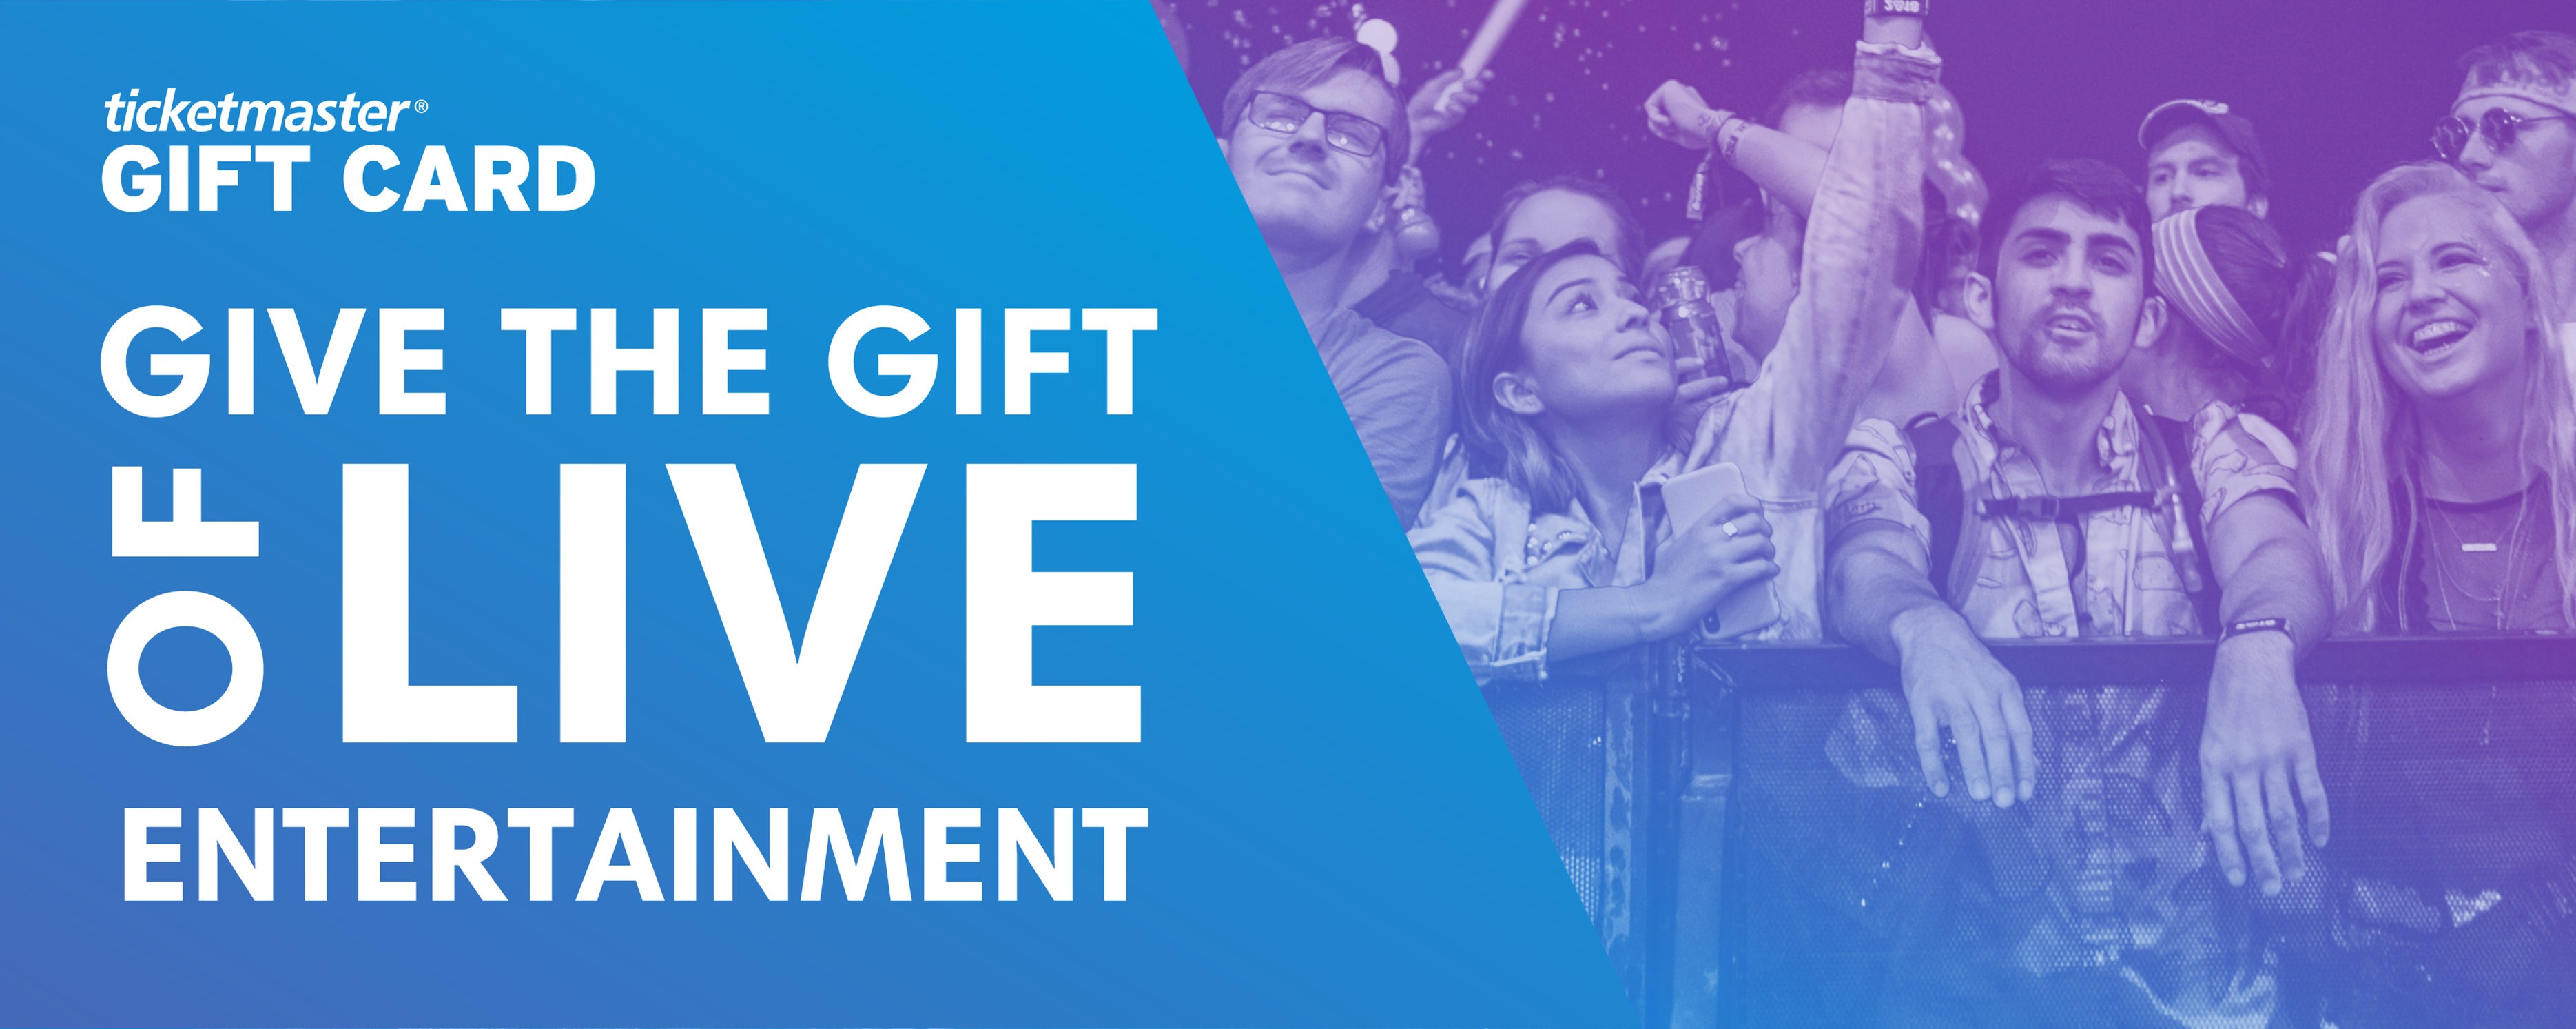 Gift Card Terms Official Ticketmaster site.